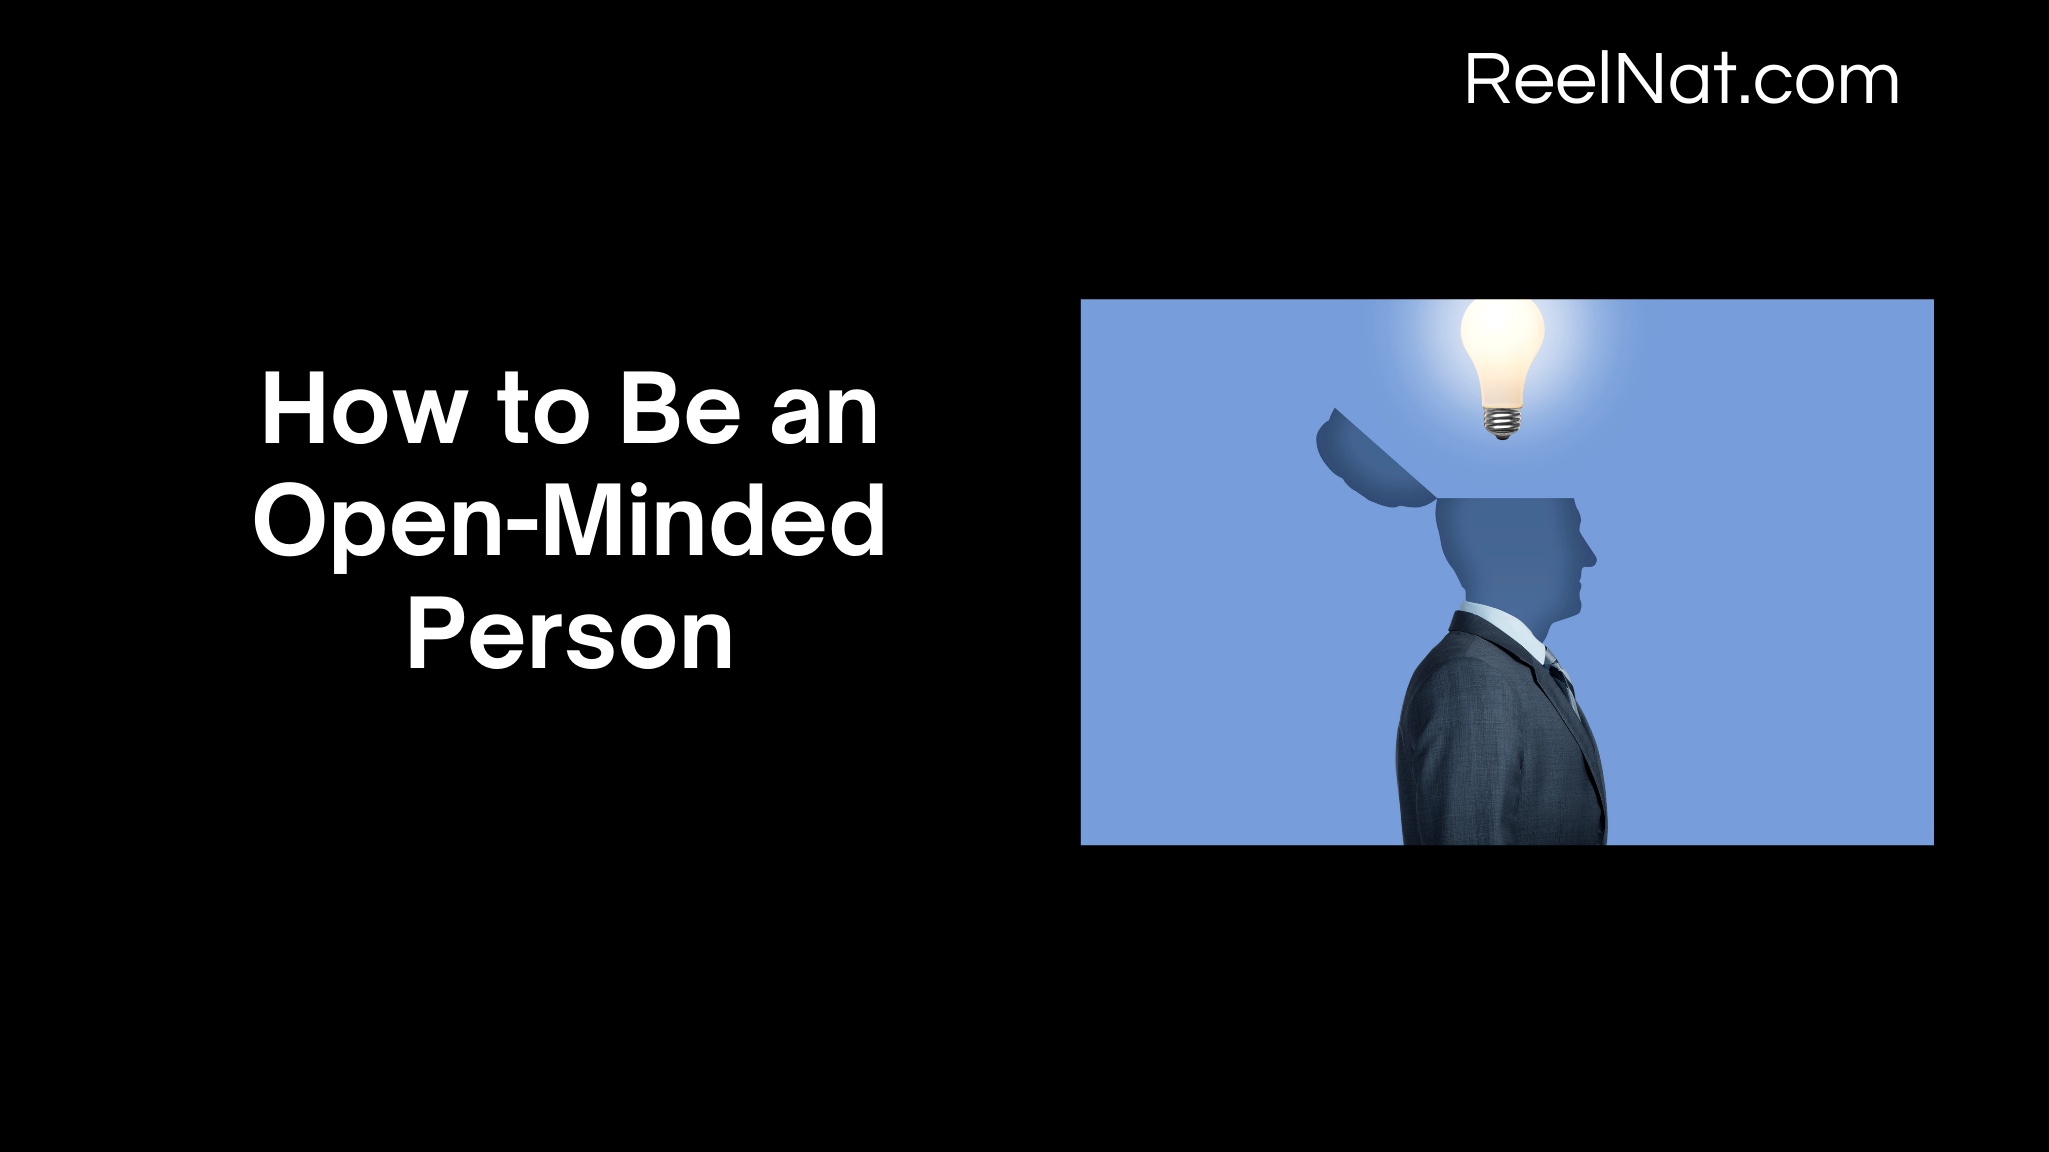 [Fixed] How to Be an Open-Minded Person